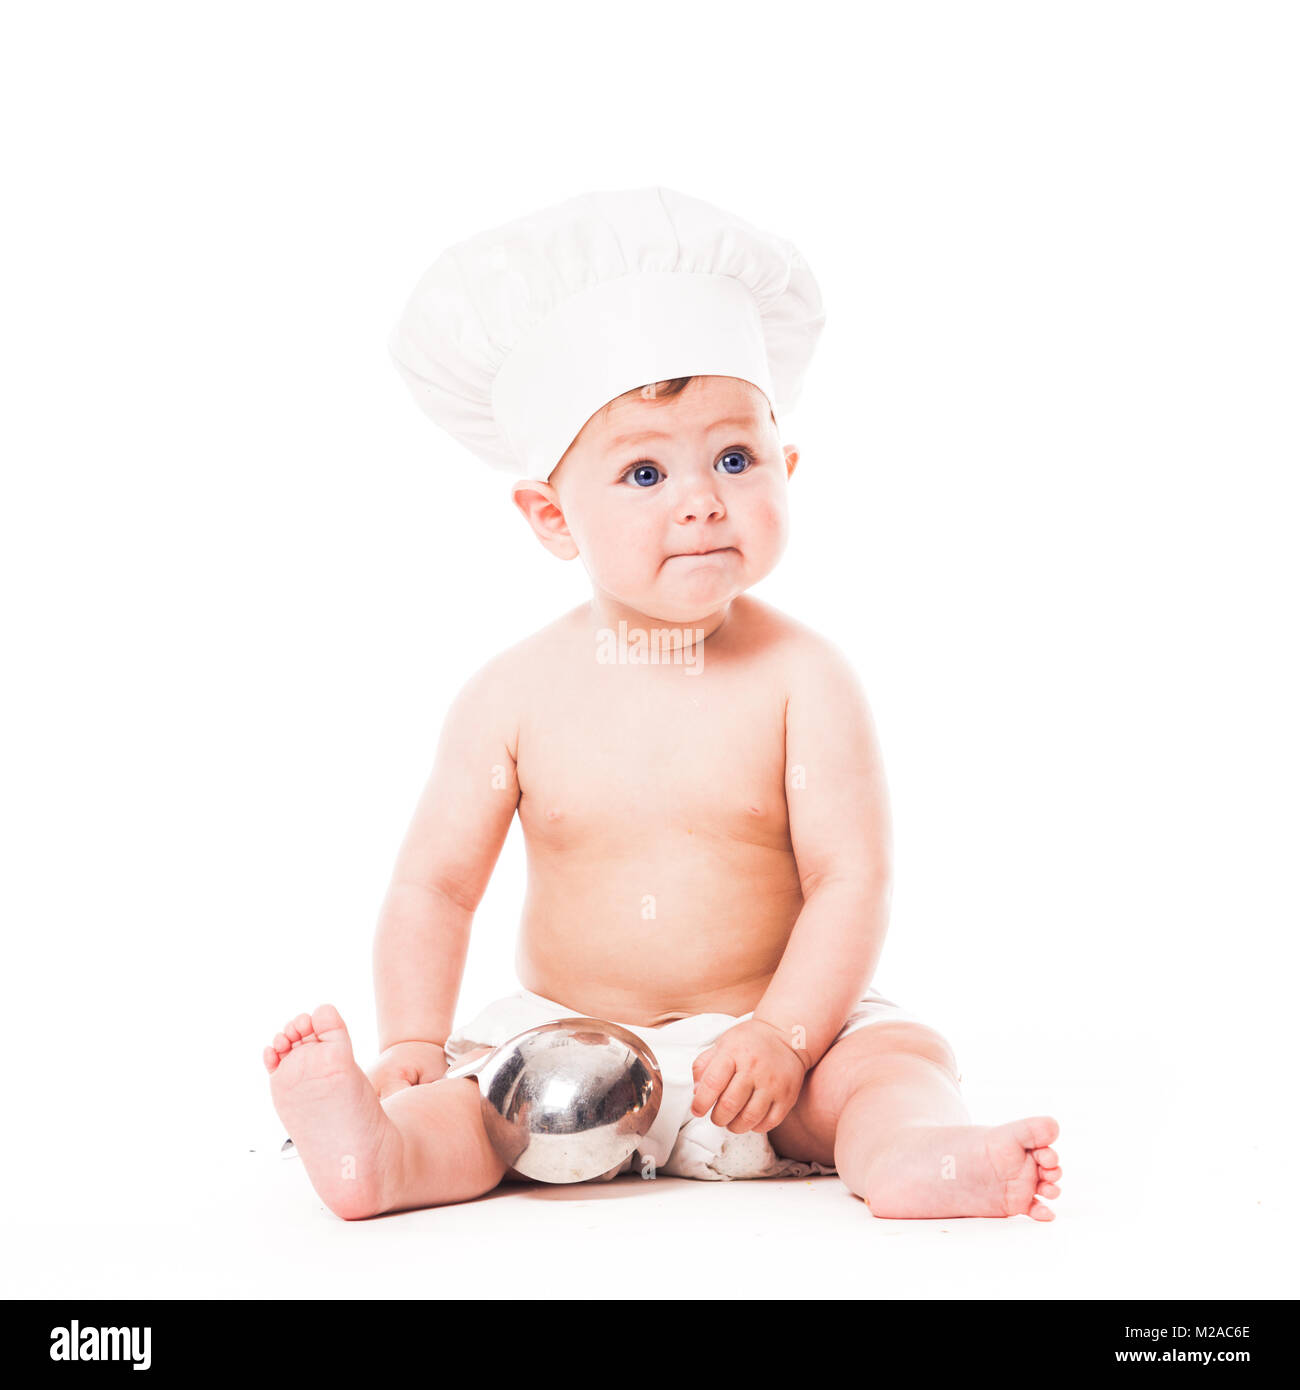 Baby cook stock photo. Image of girl, cute, child, cutting - 23481162